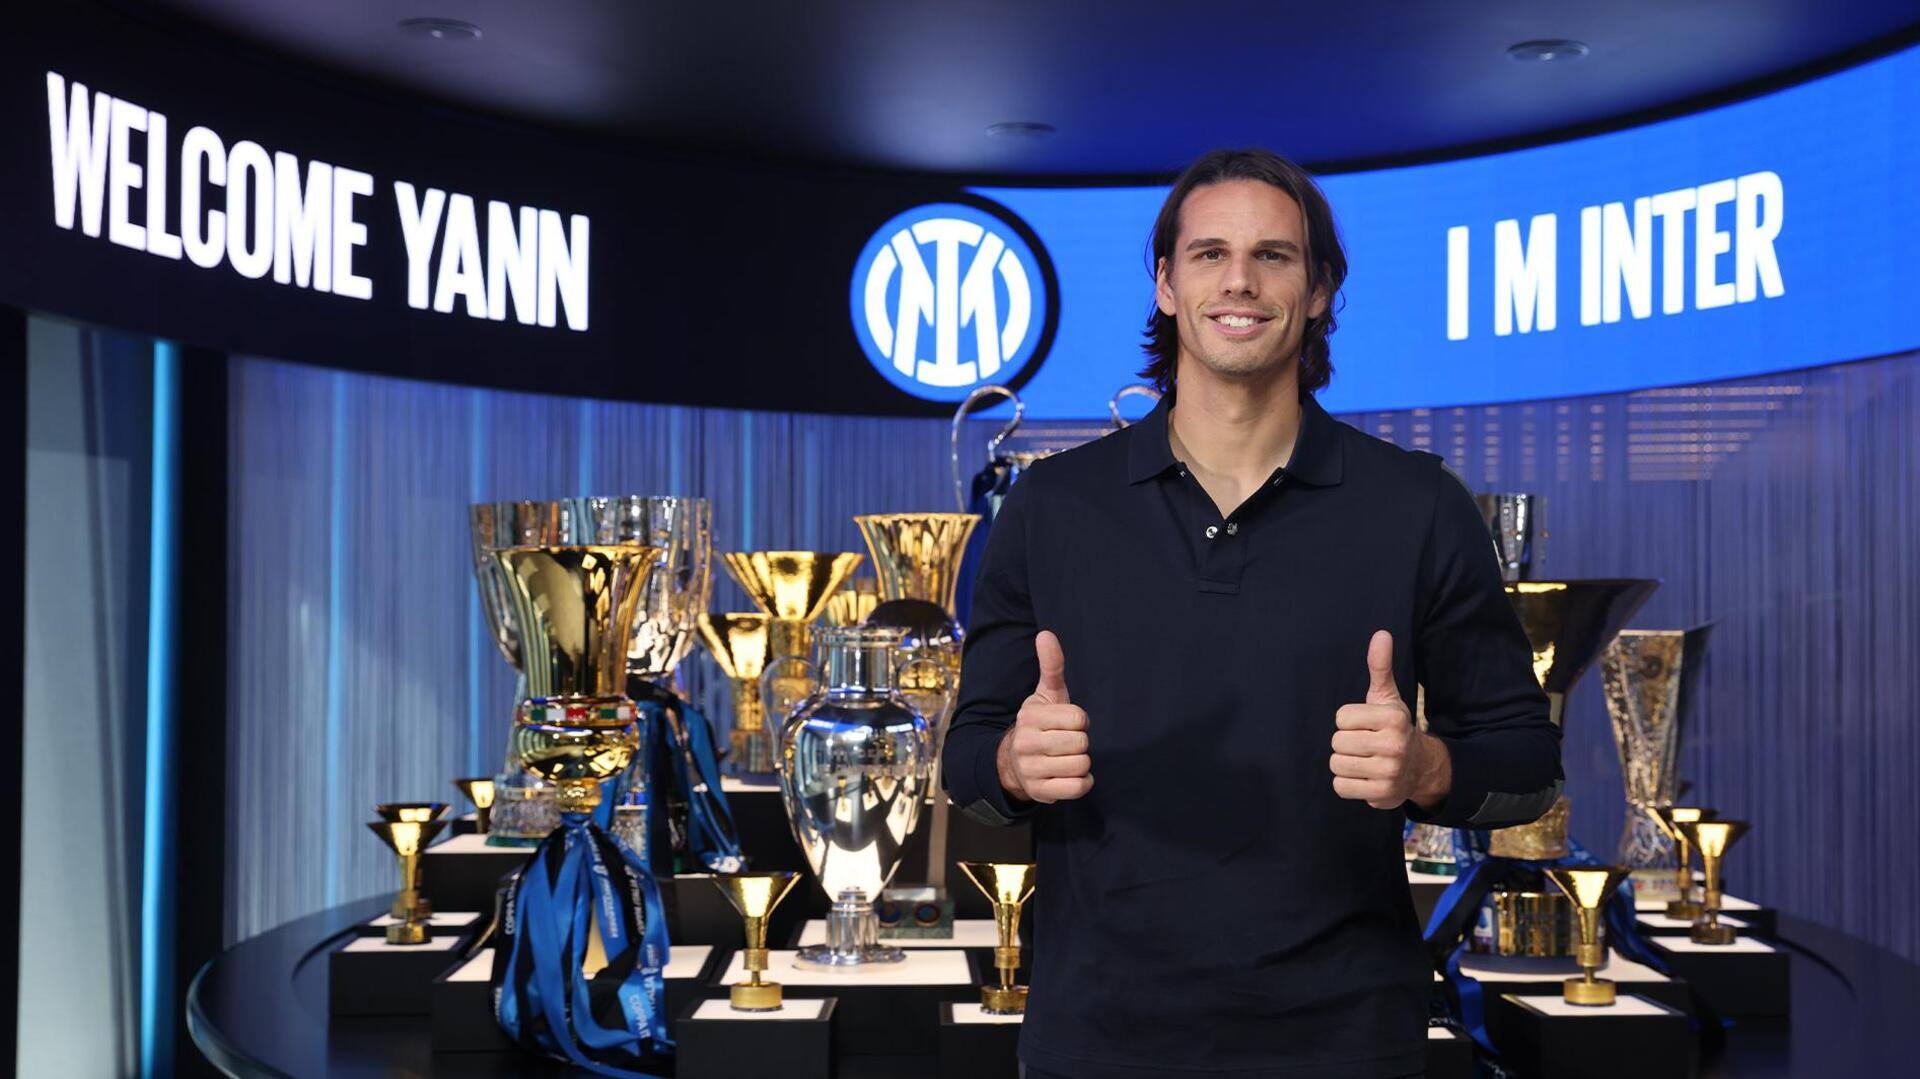 Inter Milan sign Yann Sommer for €6m: Decoding his stats